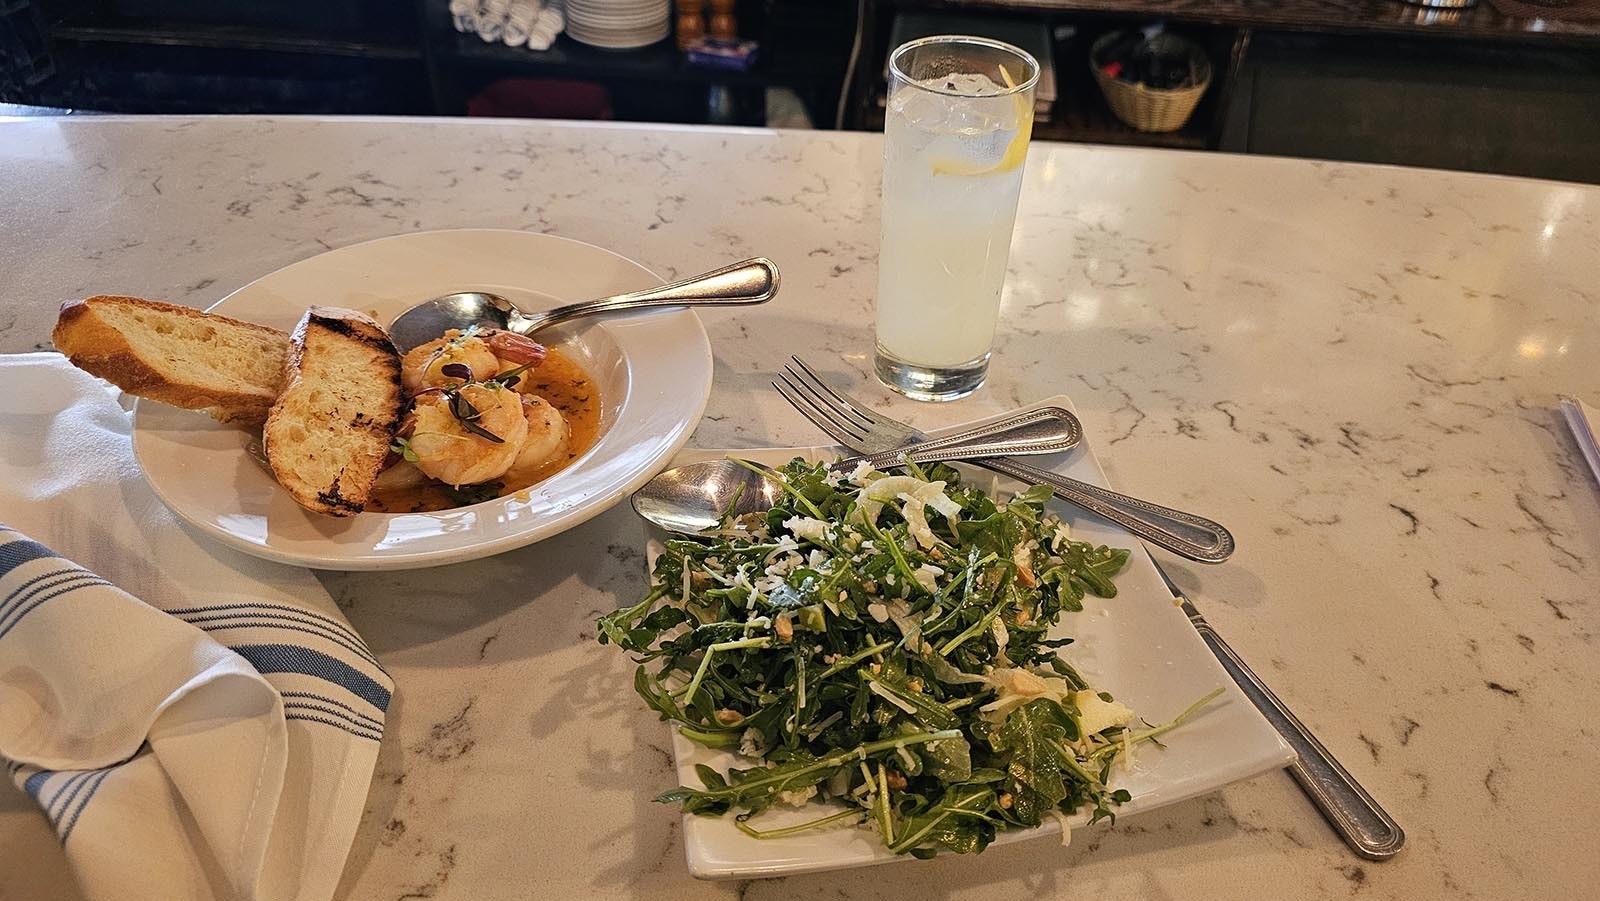 Another light lunch option, the shrimp plate, a Spanish salad, and a lemonade mocktail.